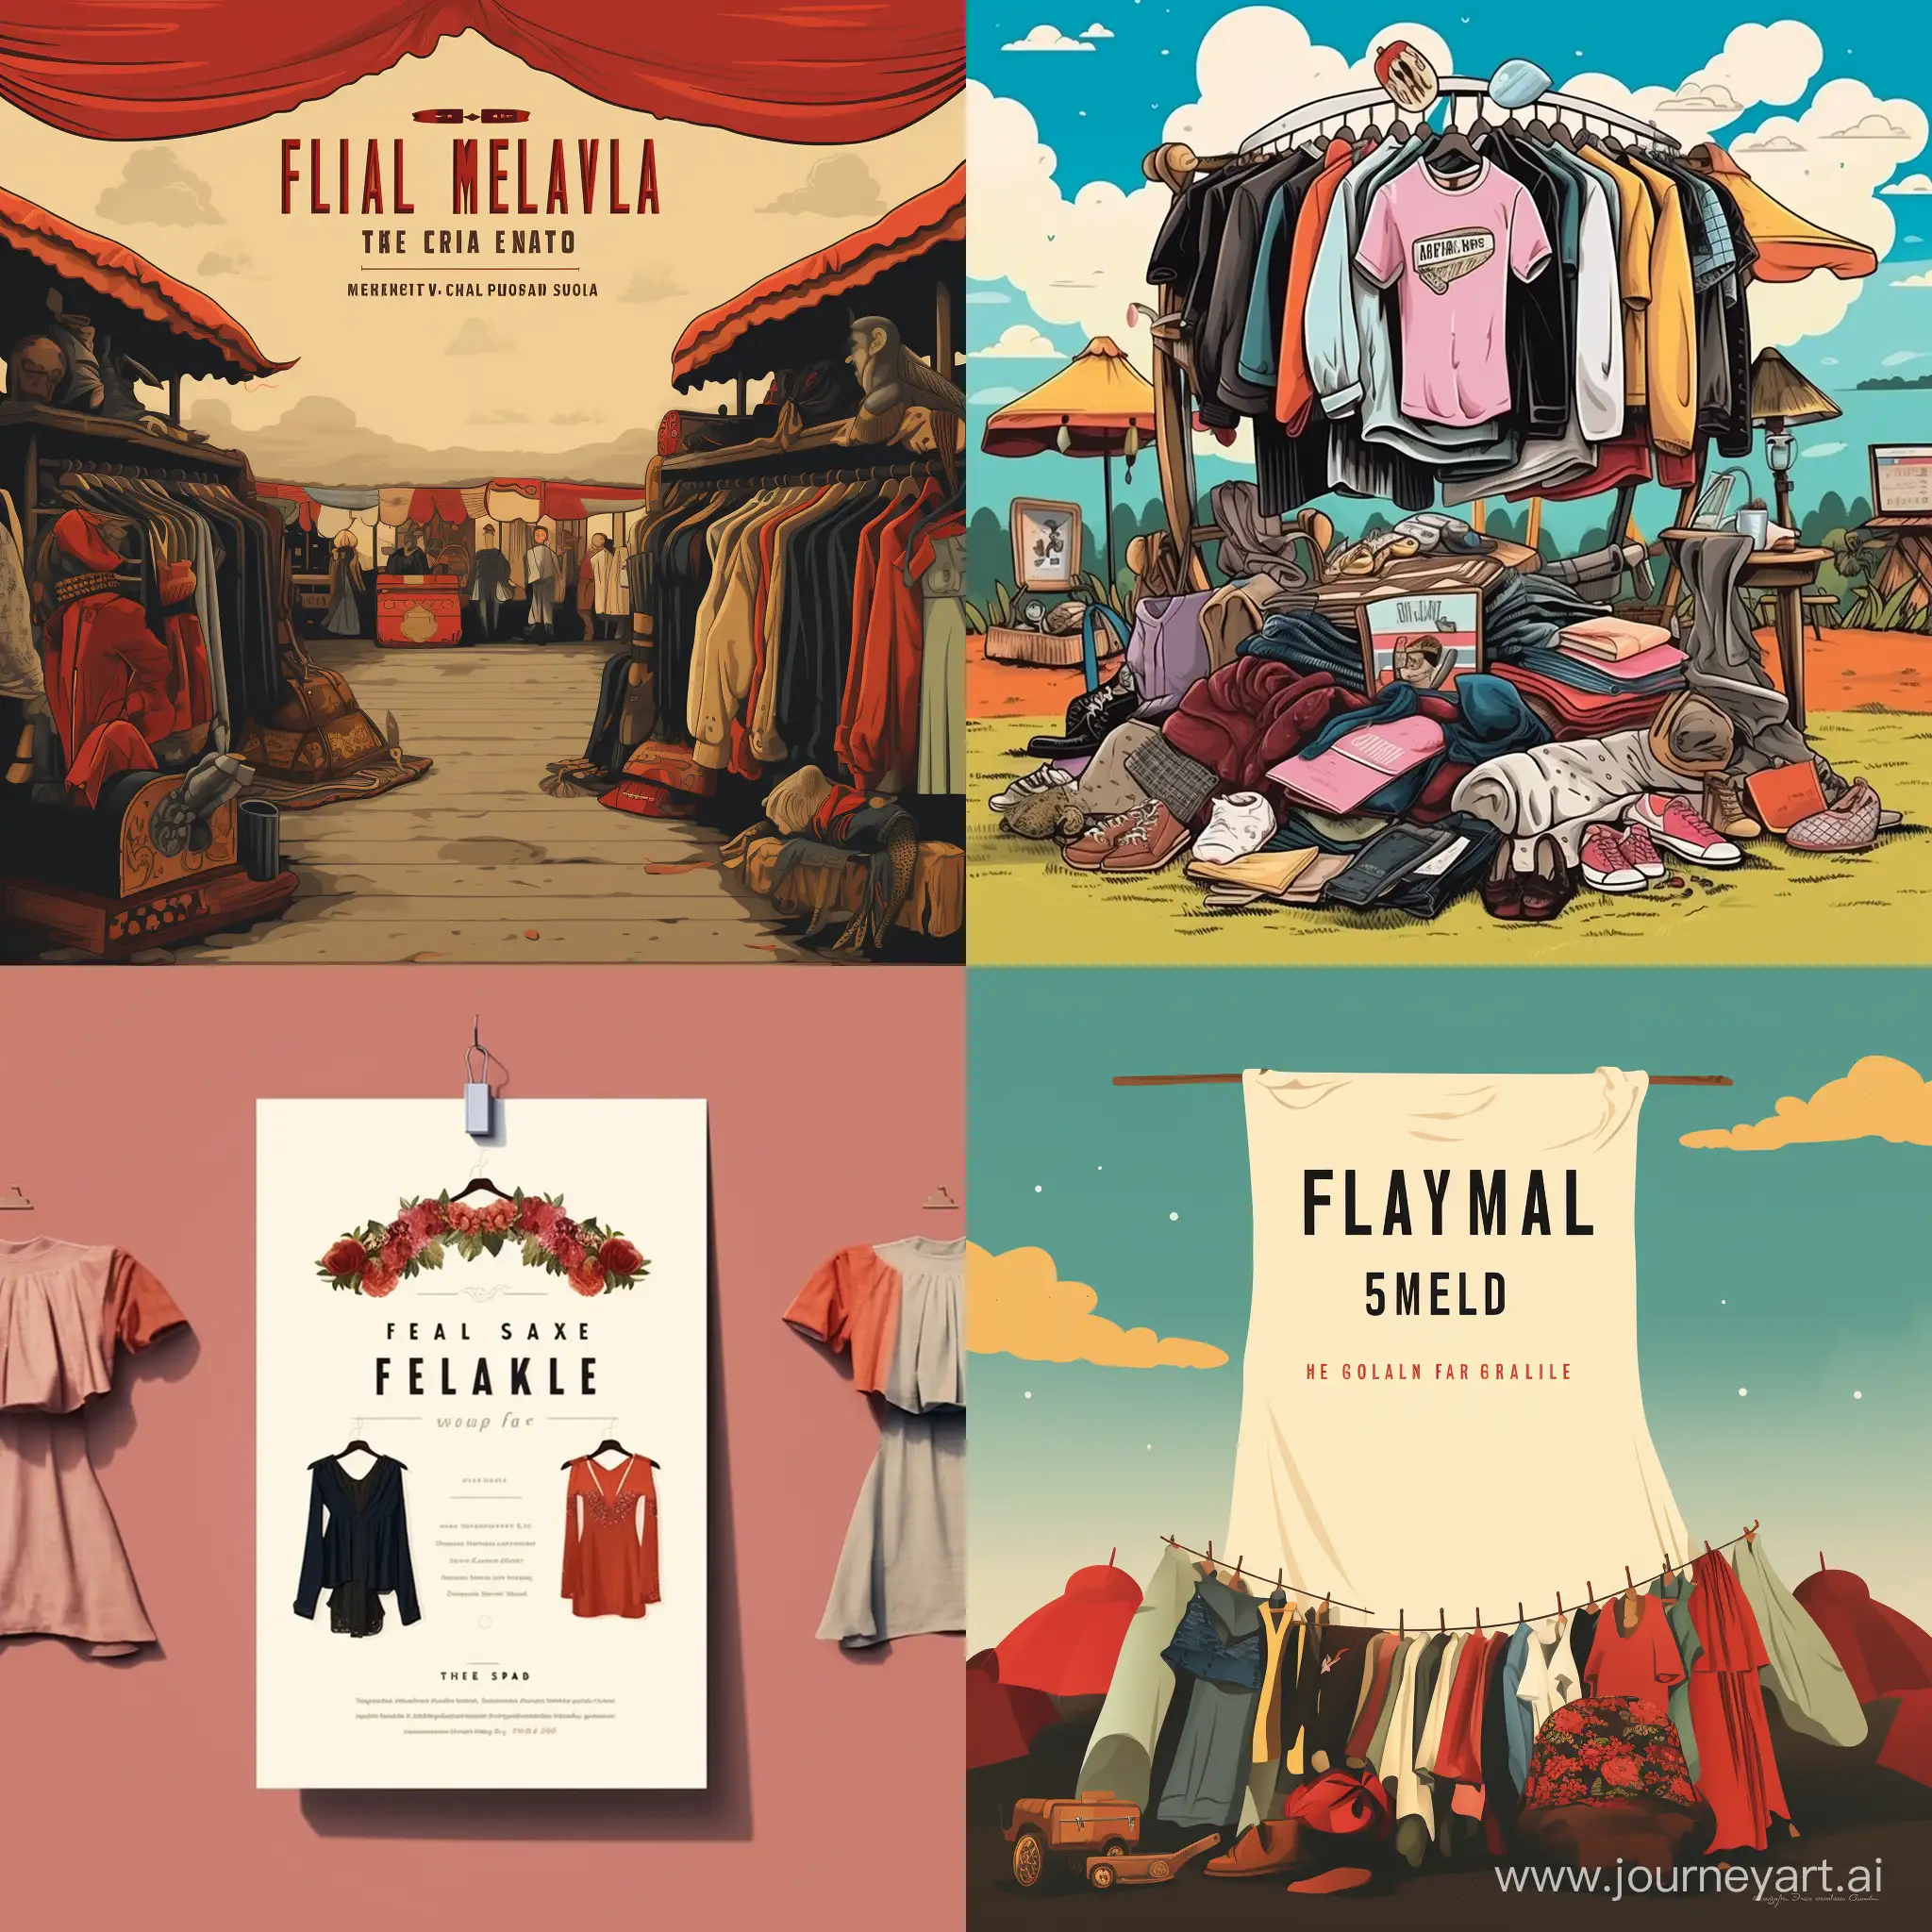 create a flyer for an event selling used clothing at a market. The name should be kept as "Flea Market". the background should be allude to a used clothing market.